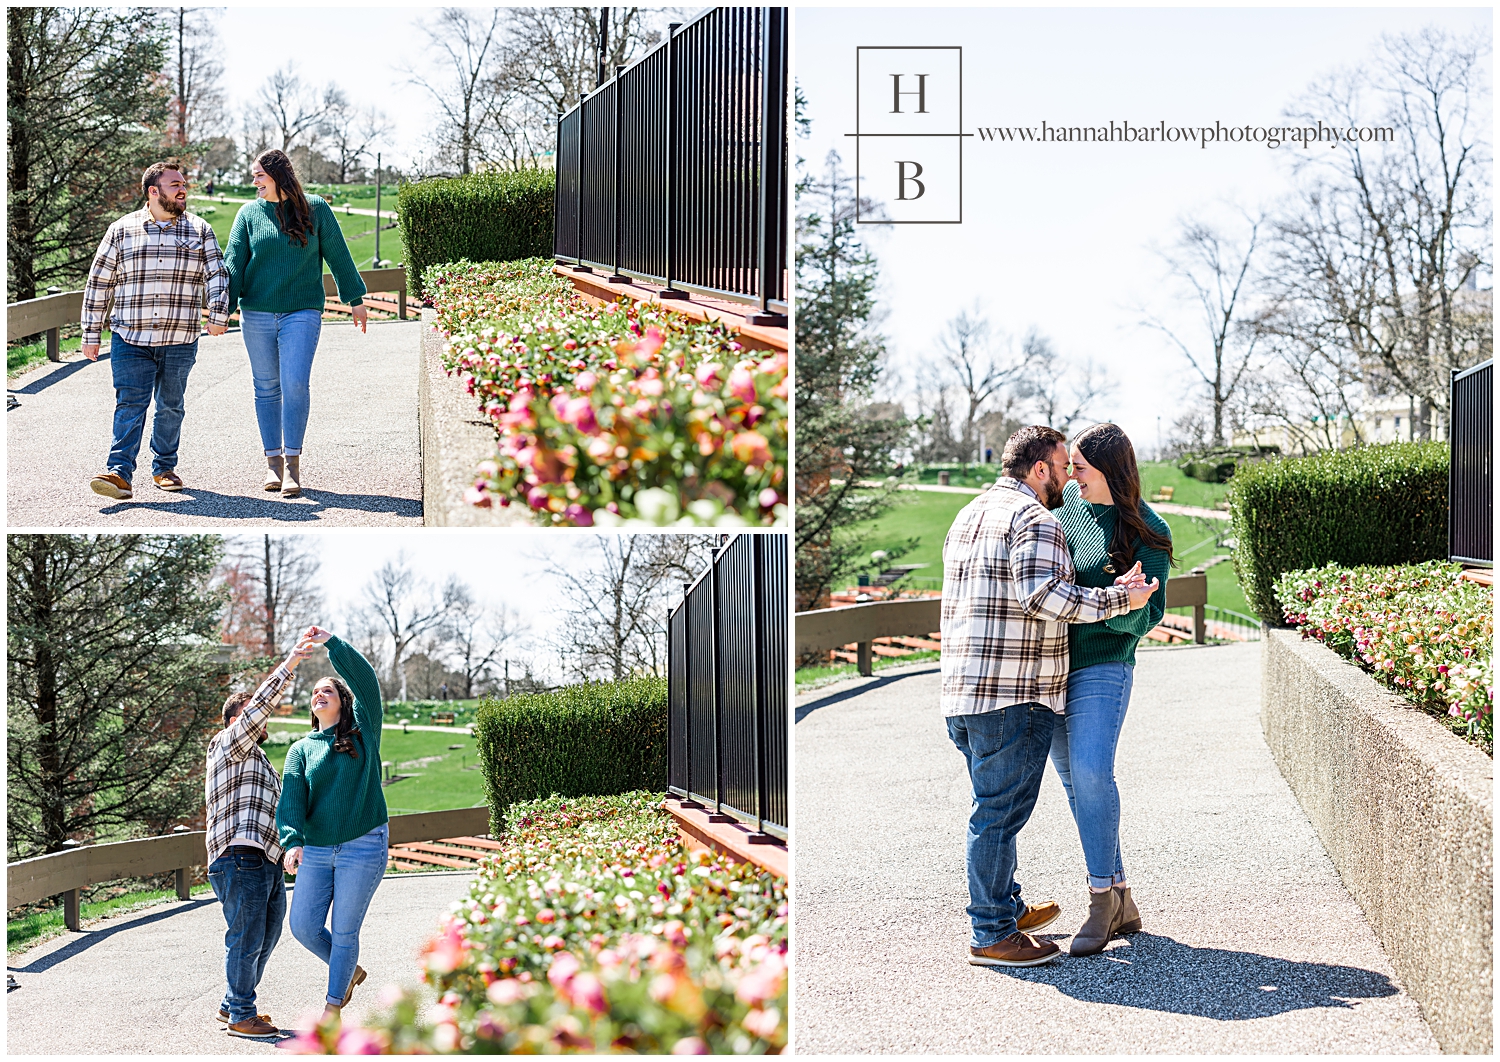 Collage of couple walking and snuggling and dancing by spring flowers in concrete bed.